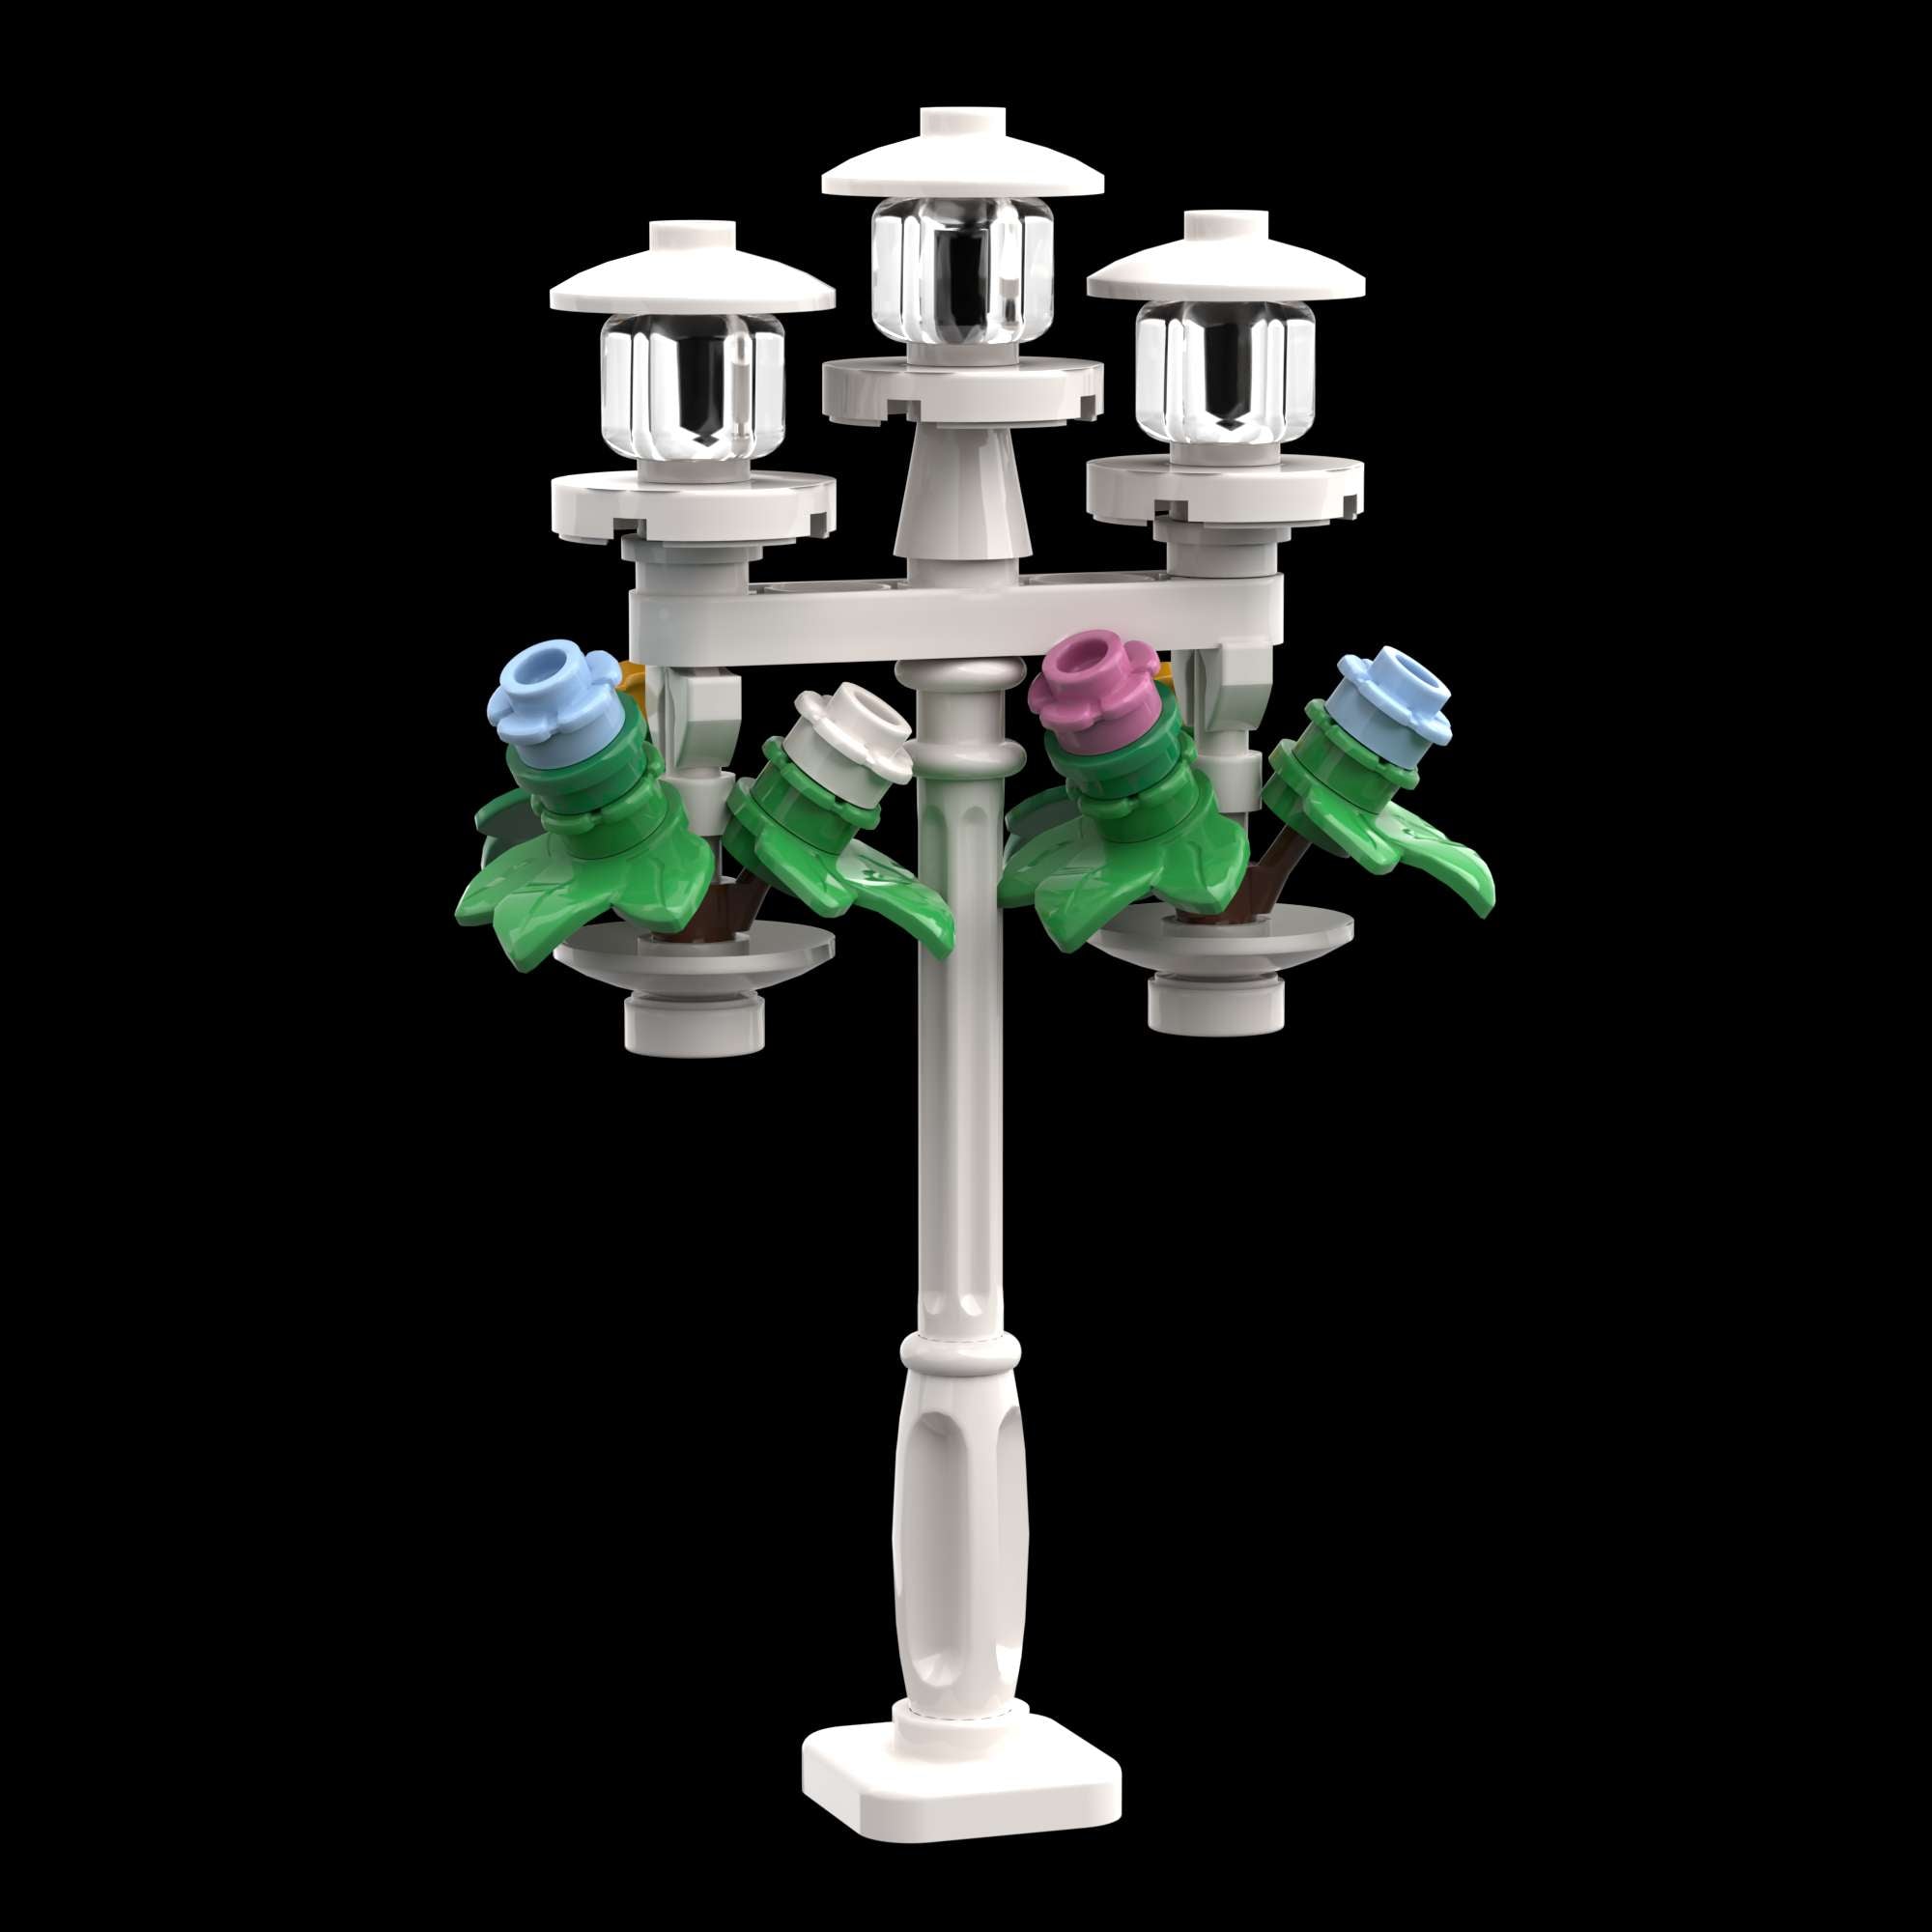 StudBee - White City Lamppost with Two Hanging Flower Baskets Kit